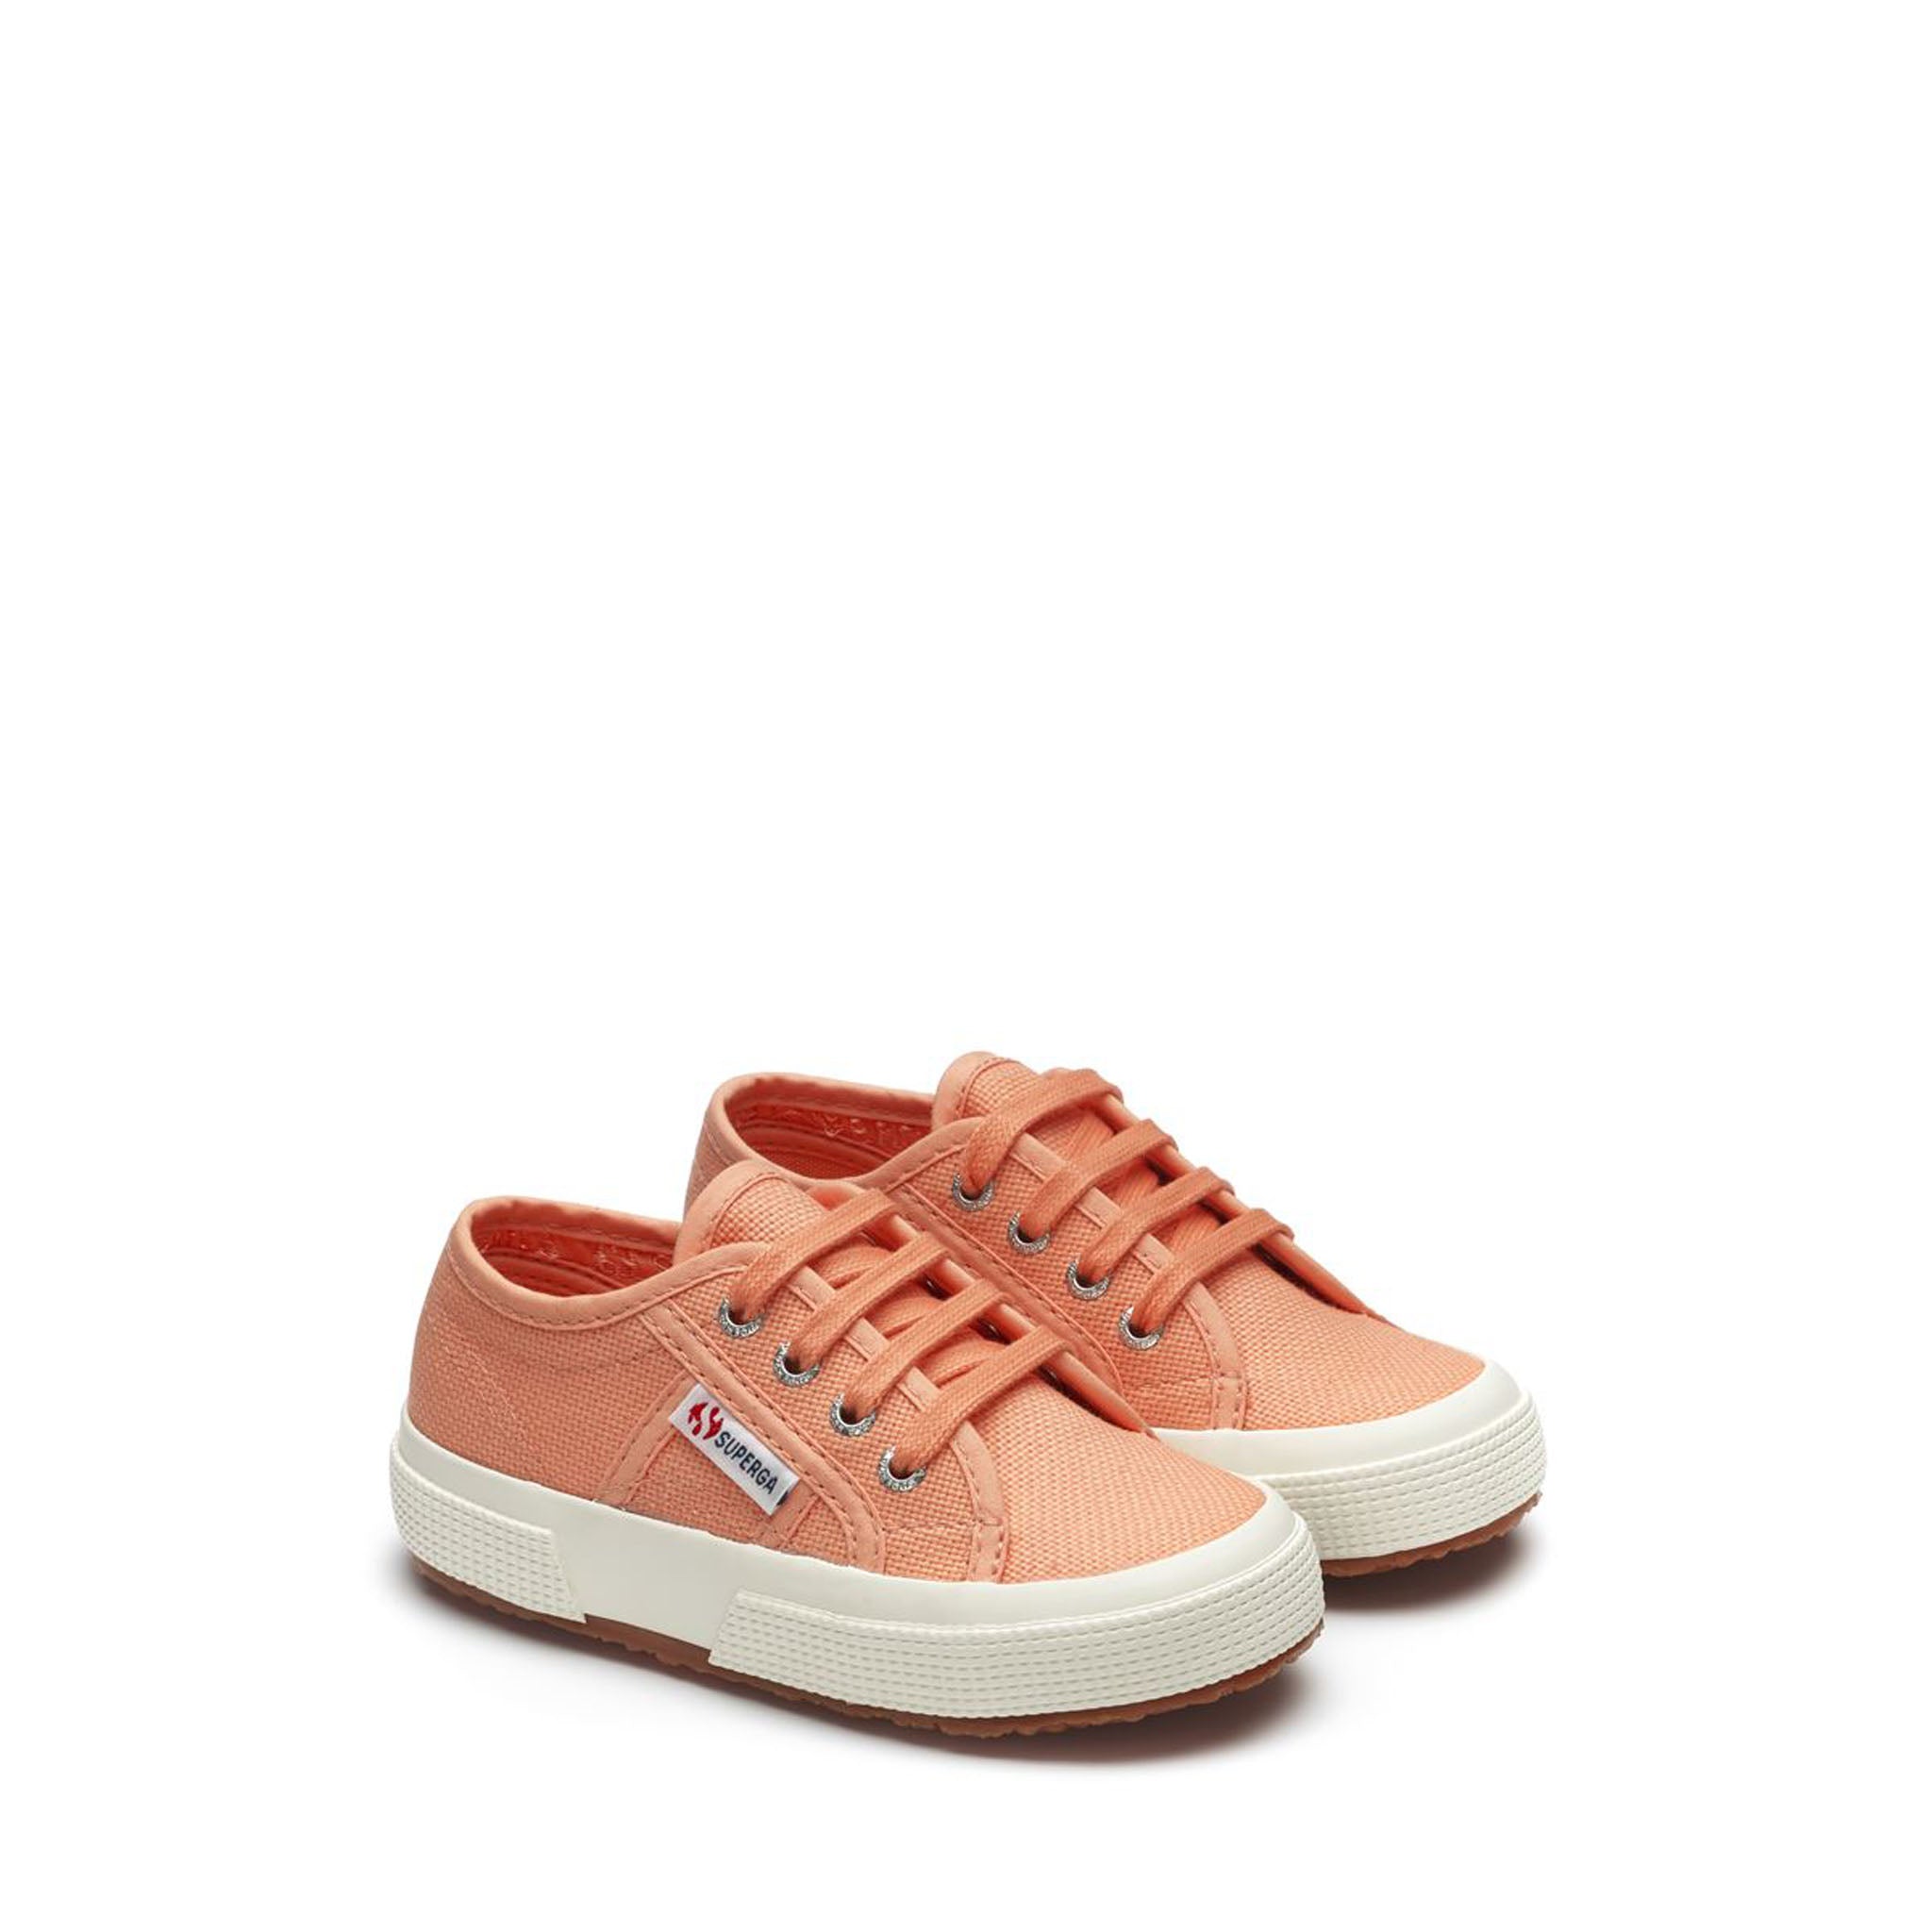 Superga 2750 Kids Jcot Classic Sneakers - Coral. Front view.